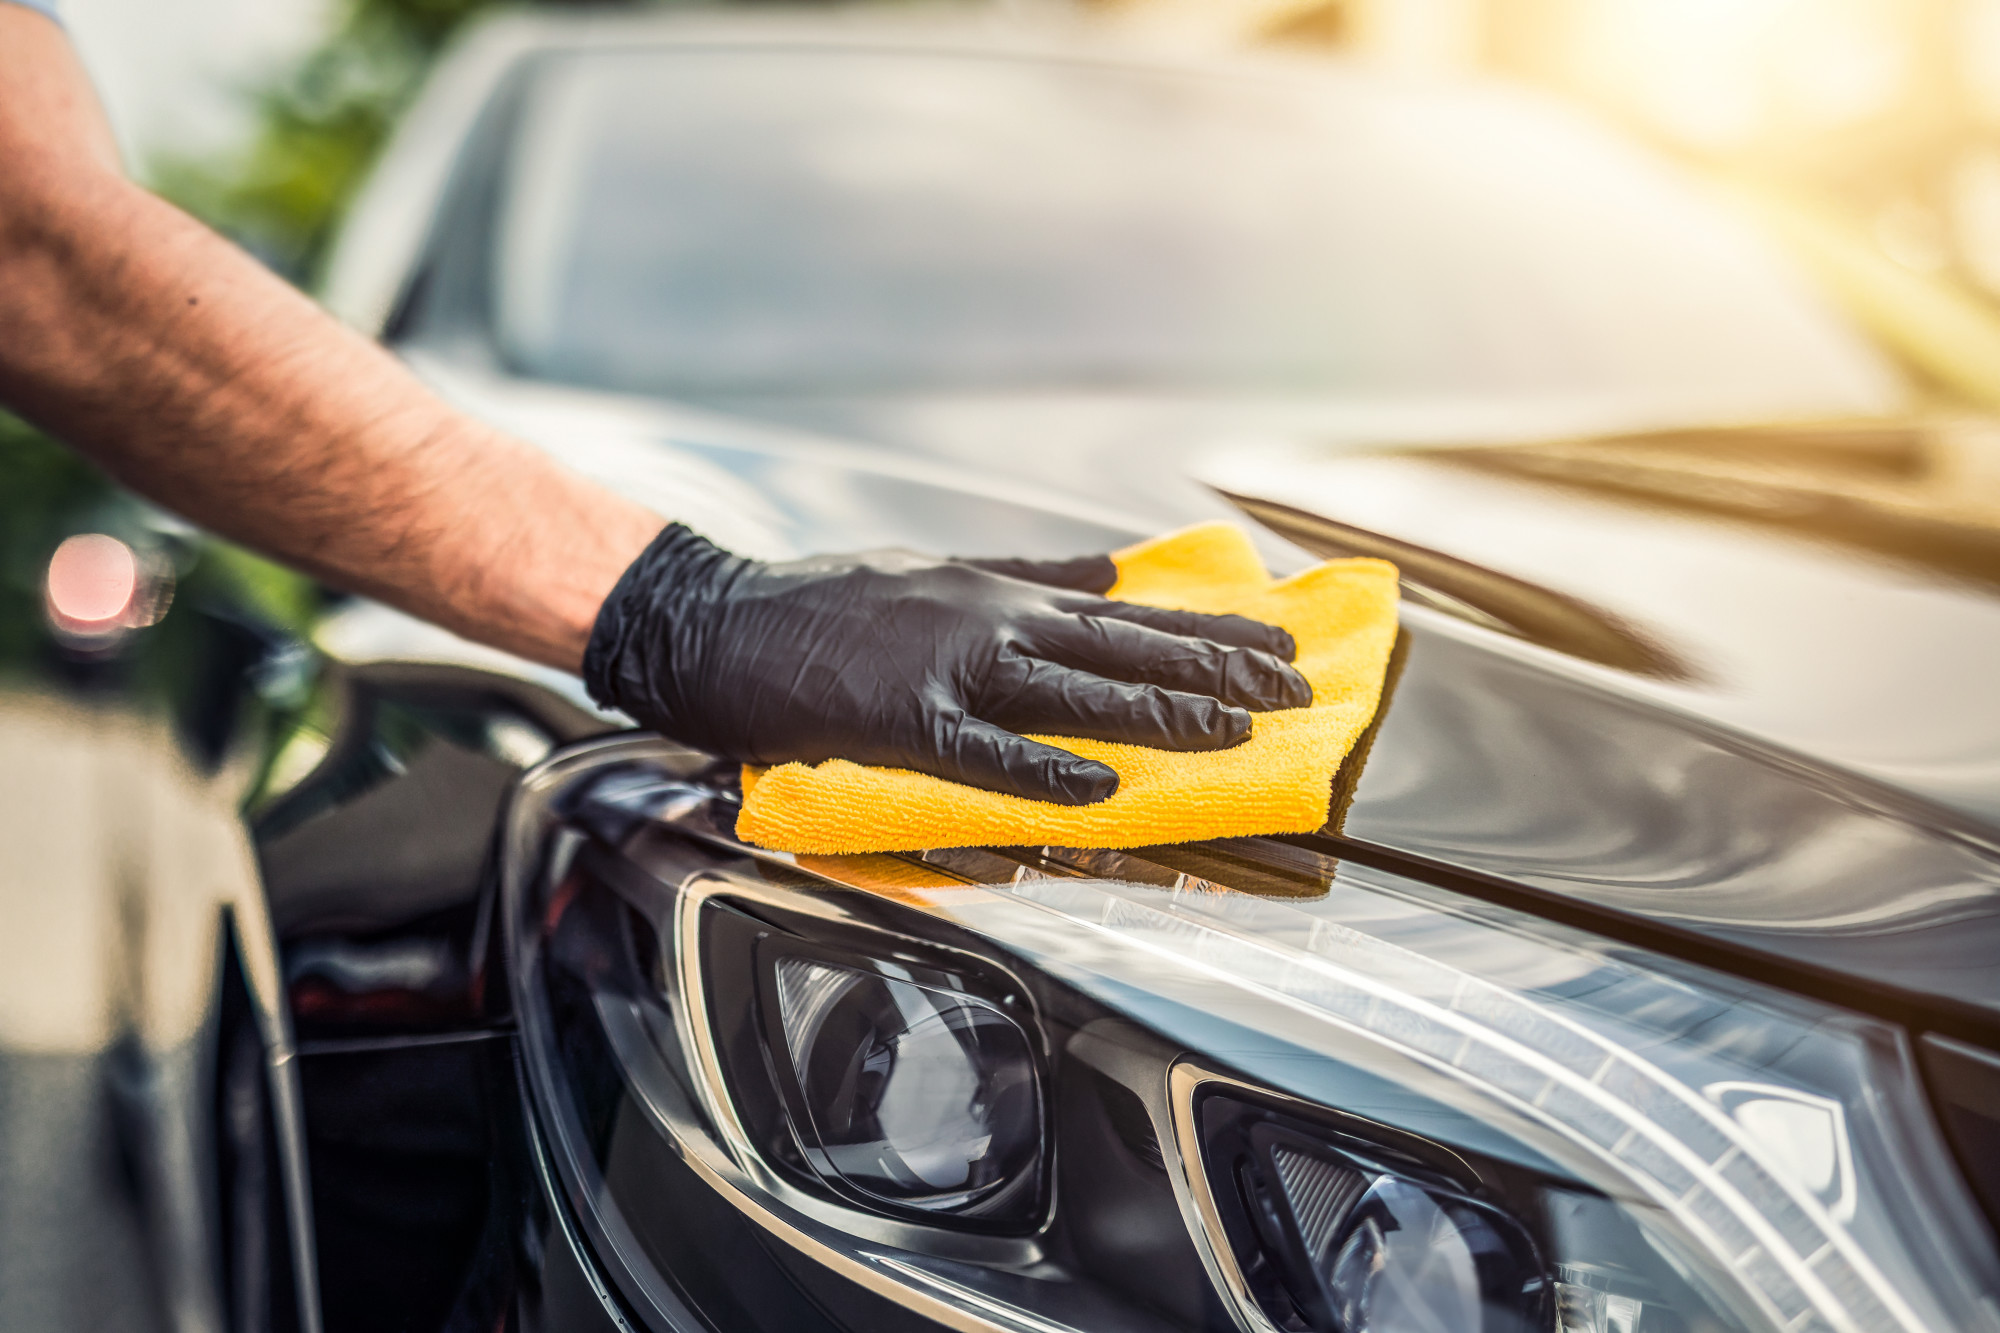 Dirty Secrets: Can Car Detailing Make Rust and Stains Disappear?